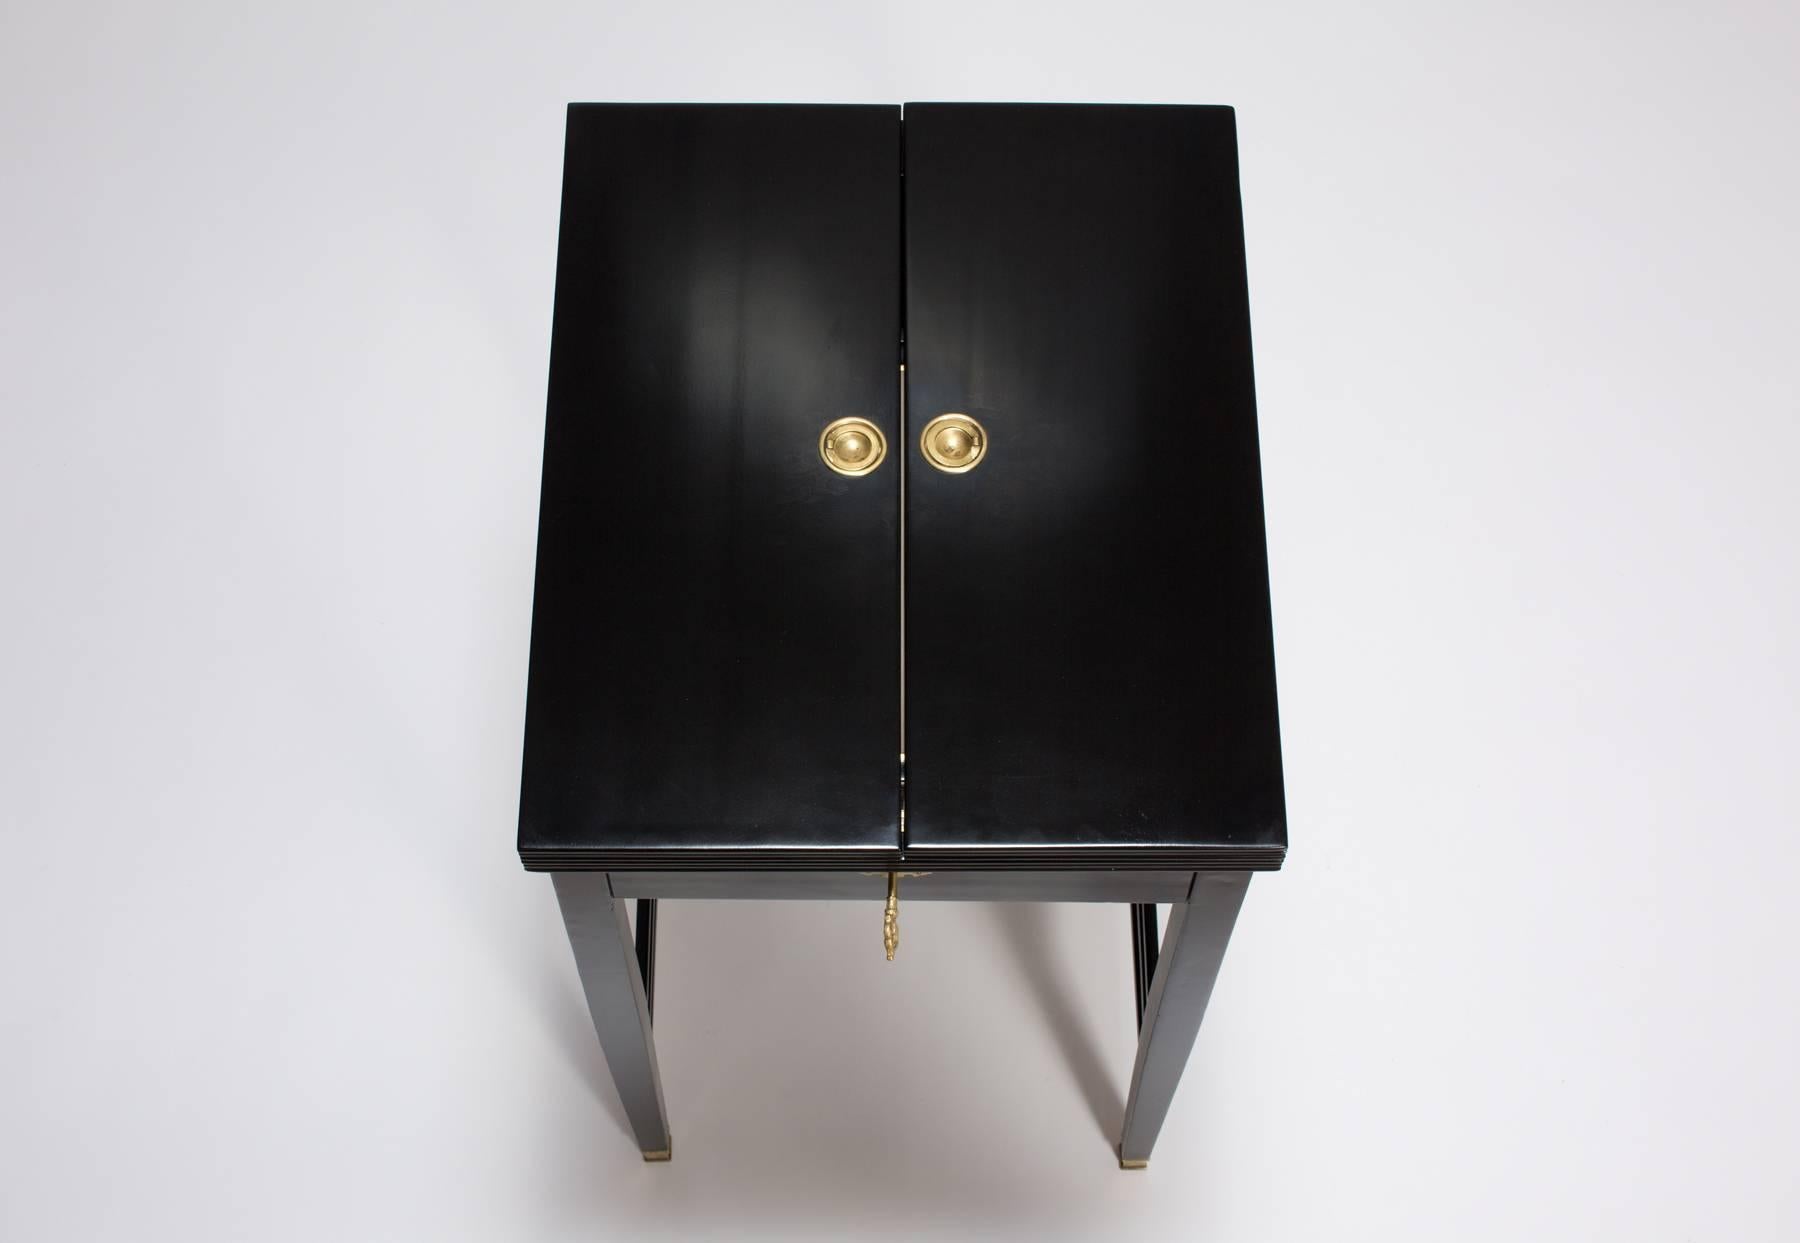 Early 20th Century Antique Black Lacquered Art Nouveau Writing Desk and Table from Vienna